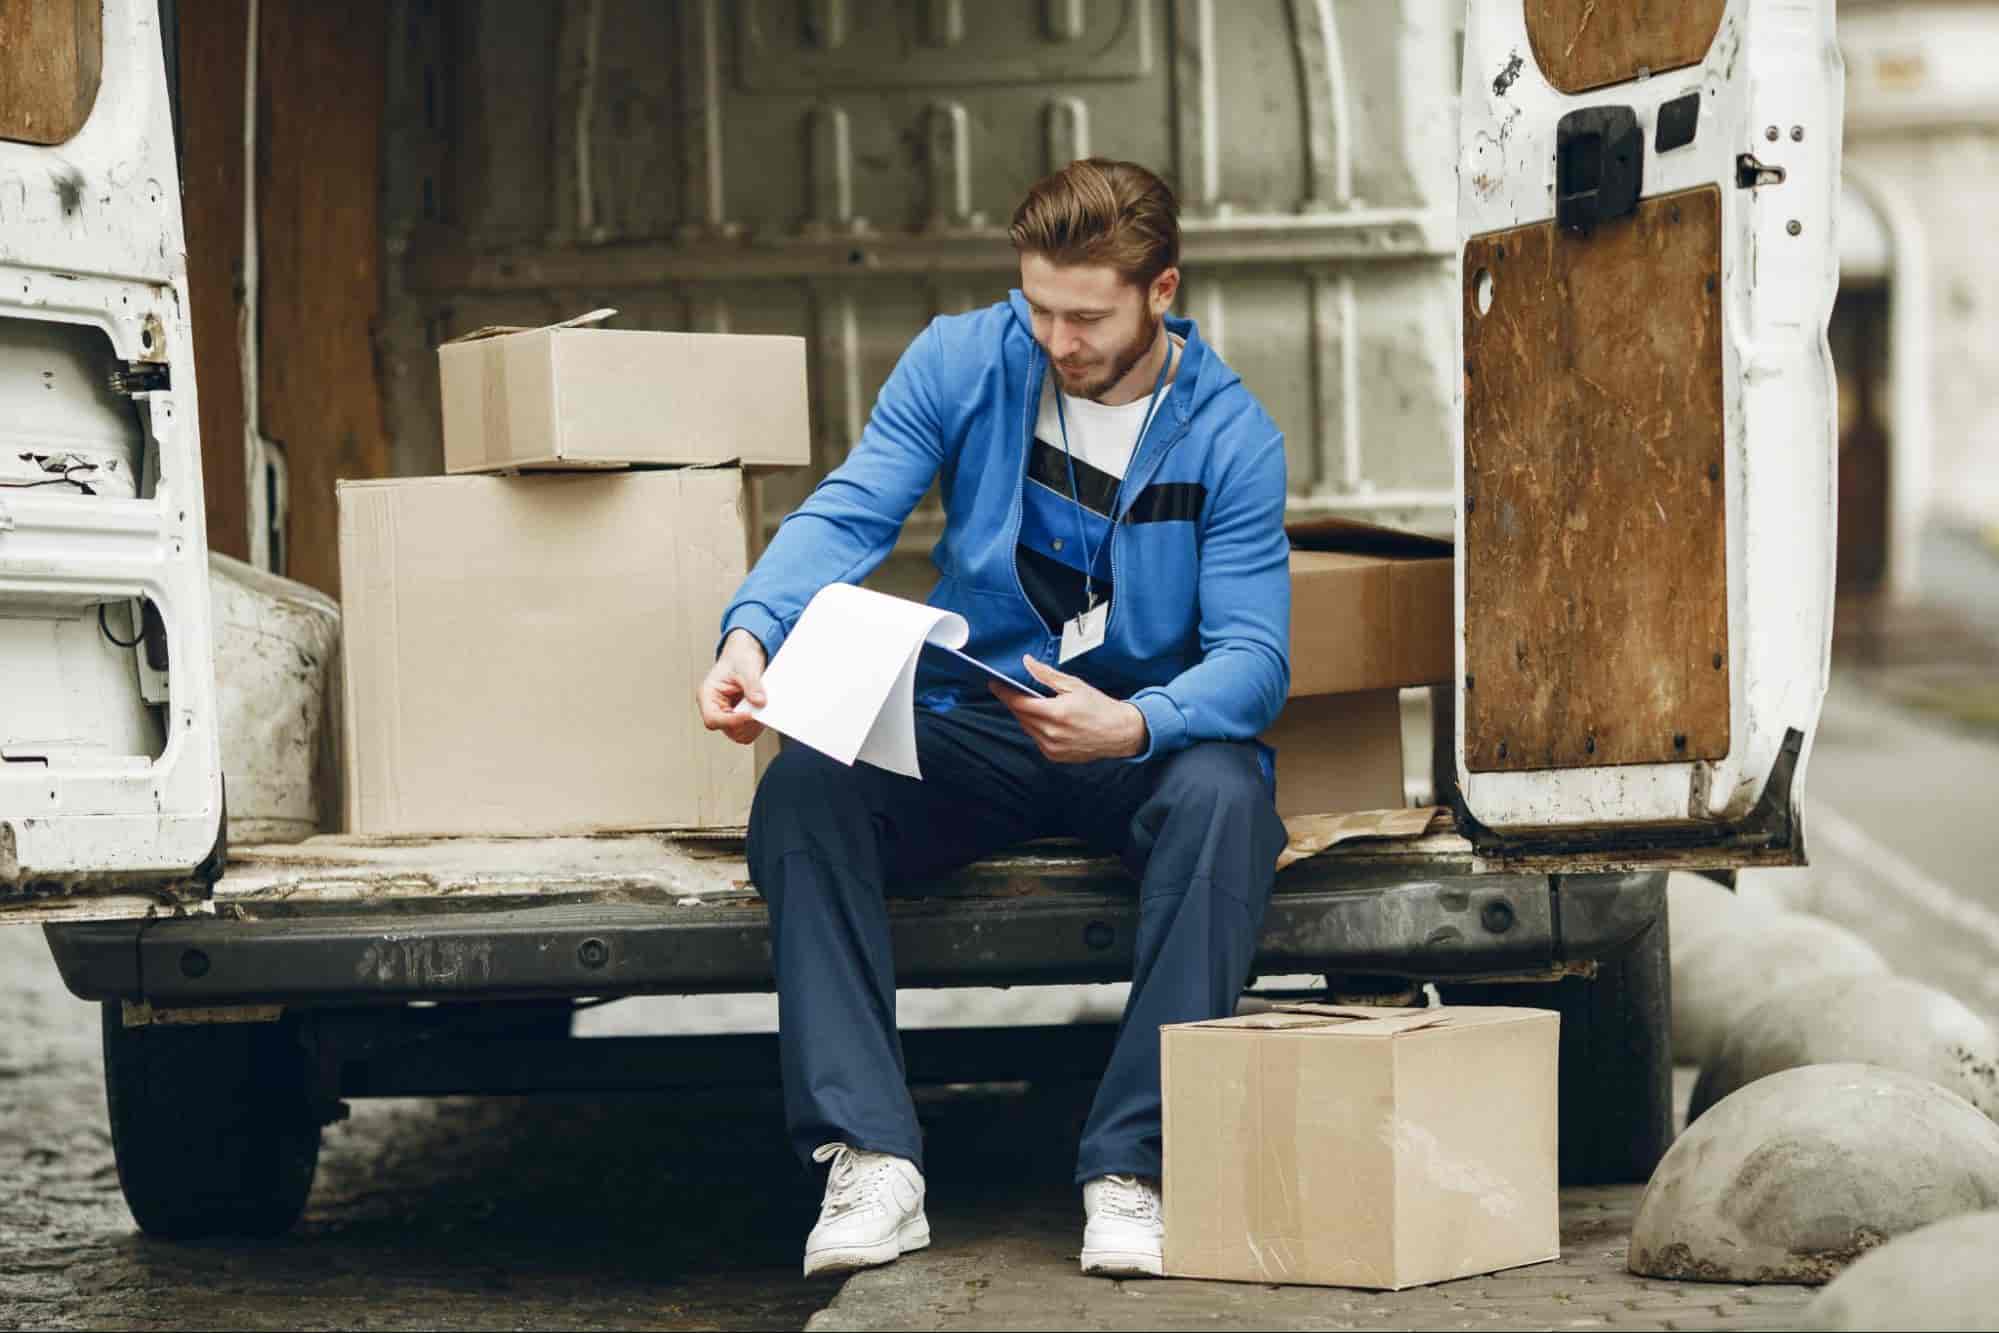 A man sat in a van with a supply chain issue, surrounded by inventory and looking through documents.